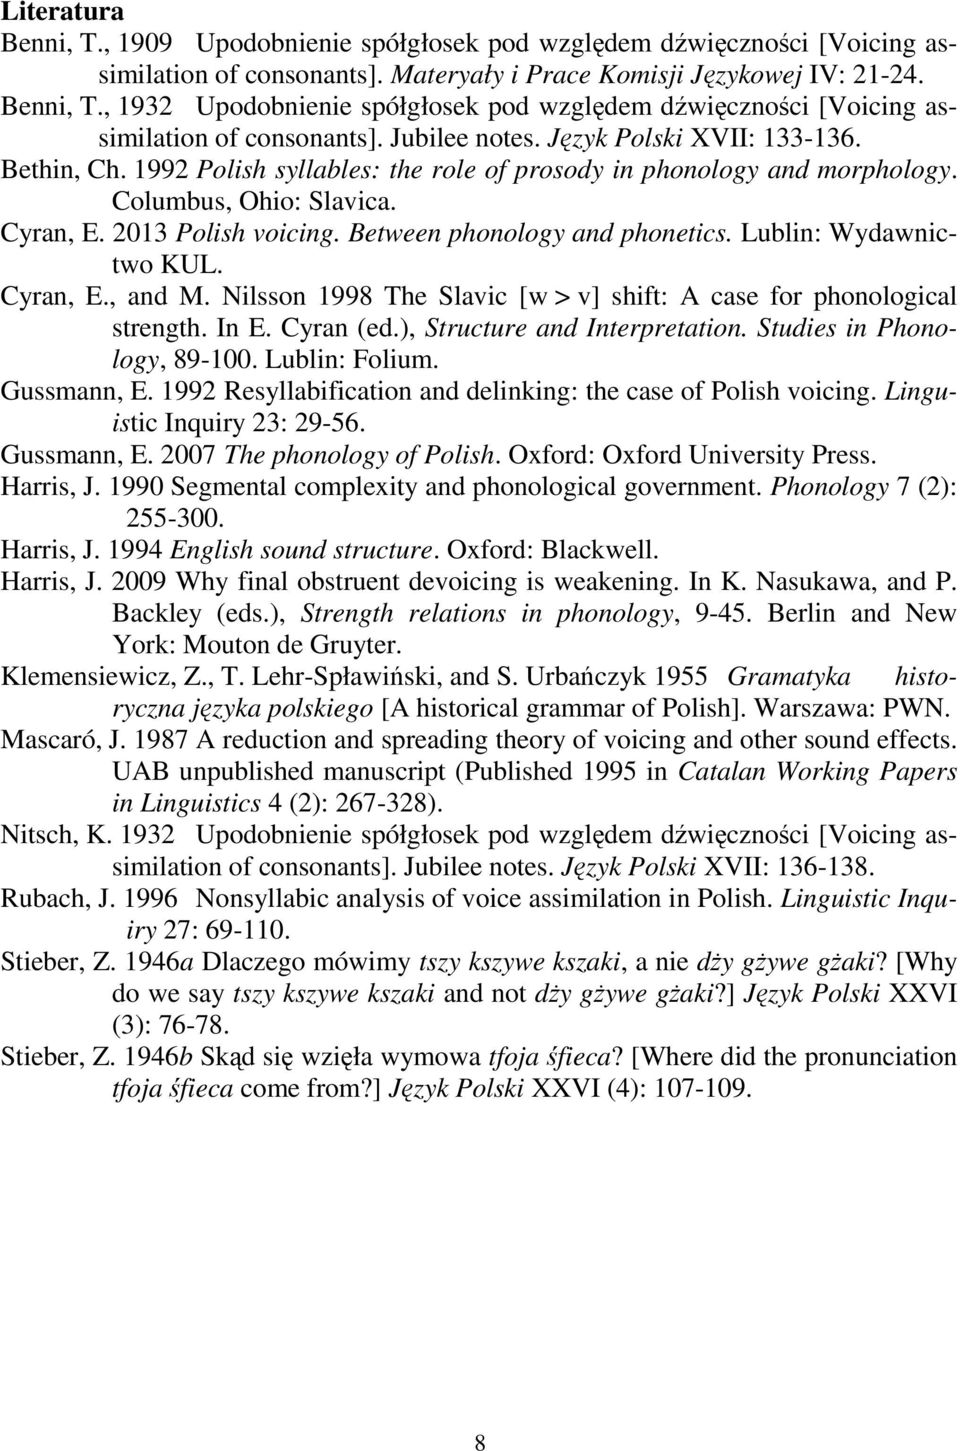 Between phonology and phonetics. Lublin: Wydawnictwo KUL. Cyran, E., and M. Nilsson 1998 The Slavic [w > v] shift: A case for phonological strength. In E. Cyran (ed.), Structure and Interpretation.